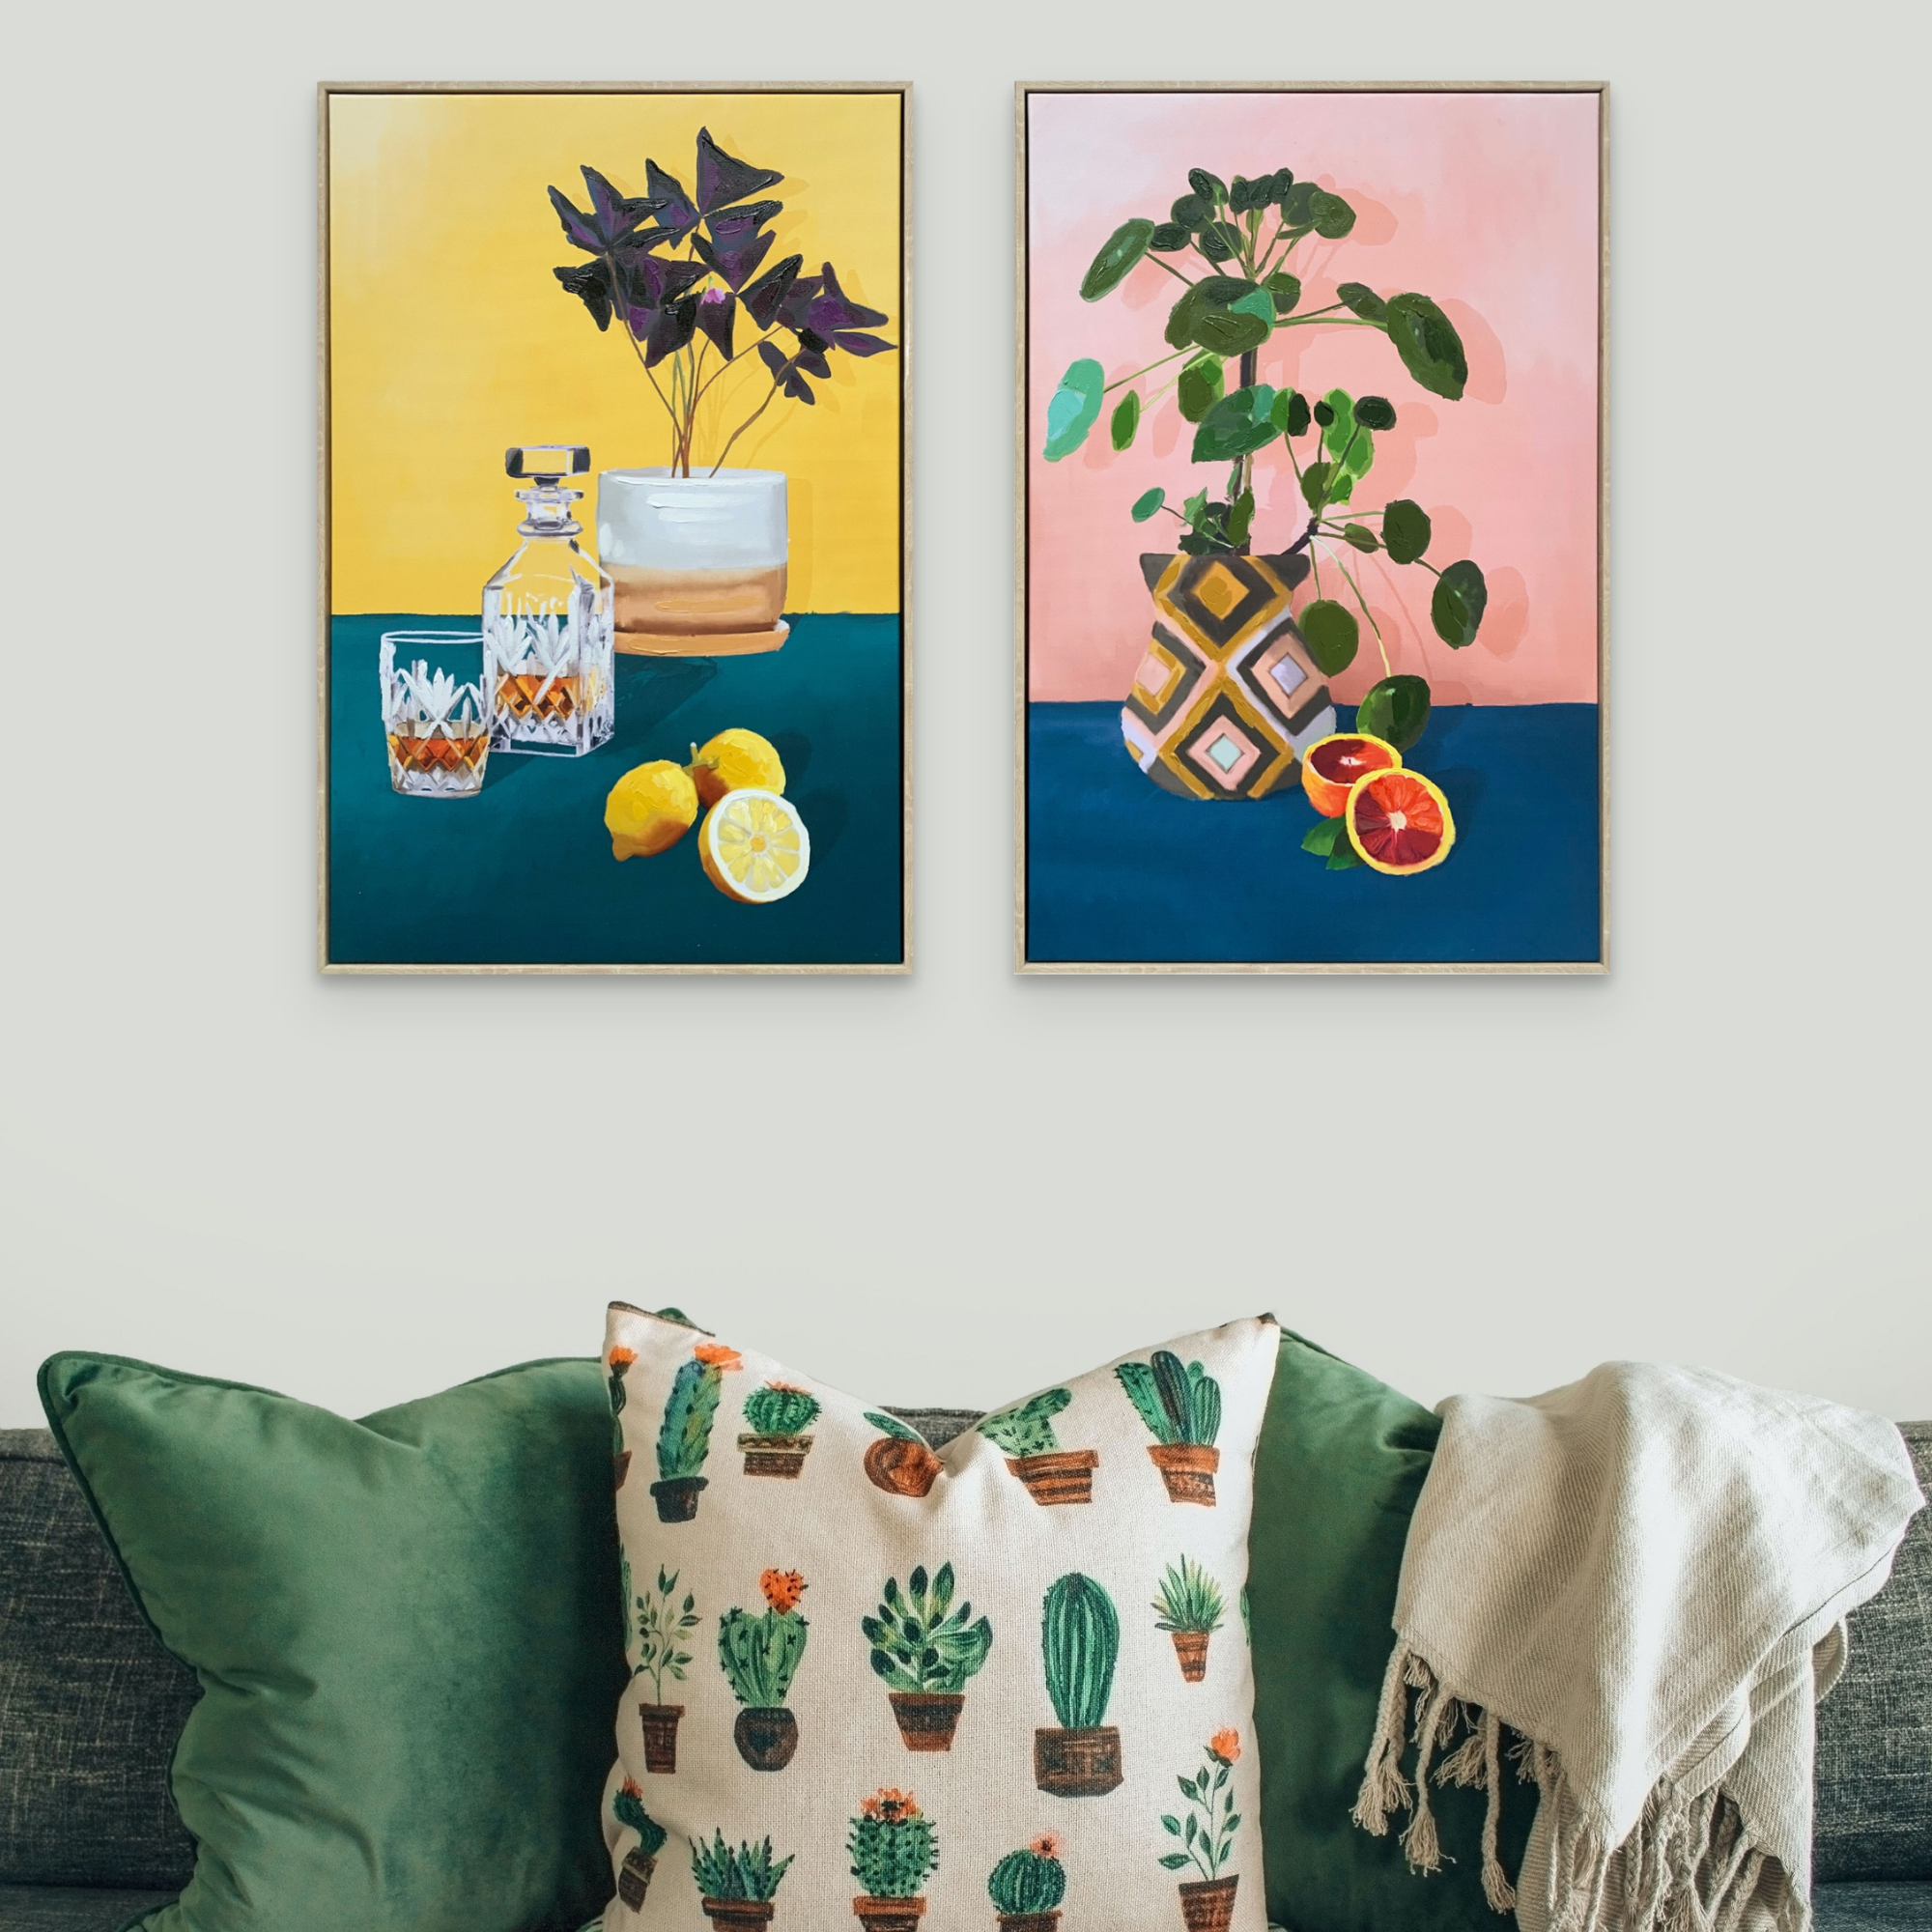 Quirky and modern Good Things framed set, with fruits and plants in a playful arrangement, size 40x60cm each.